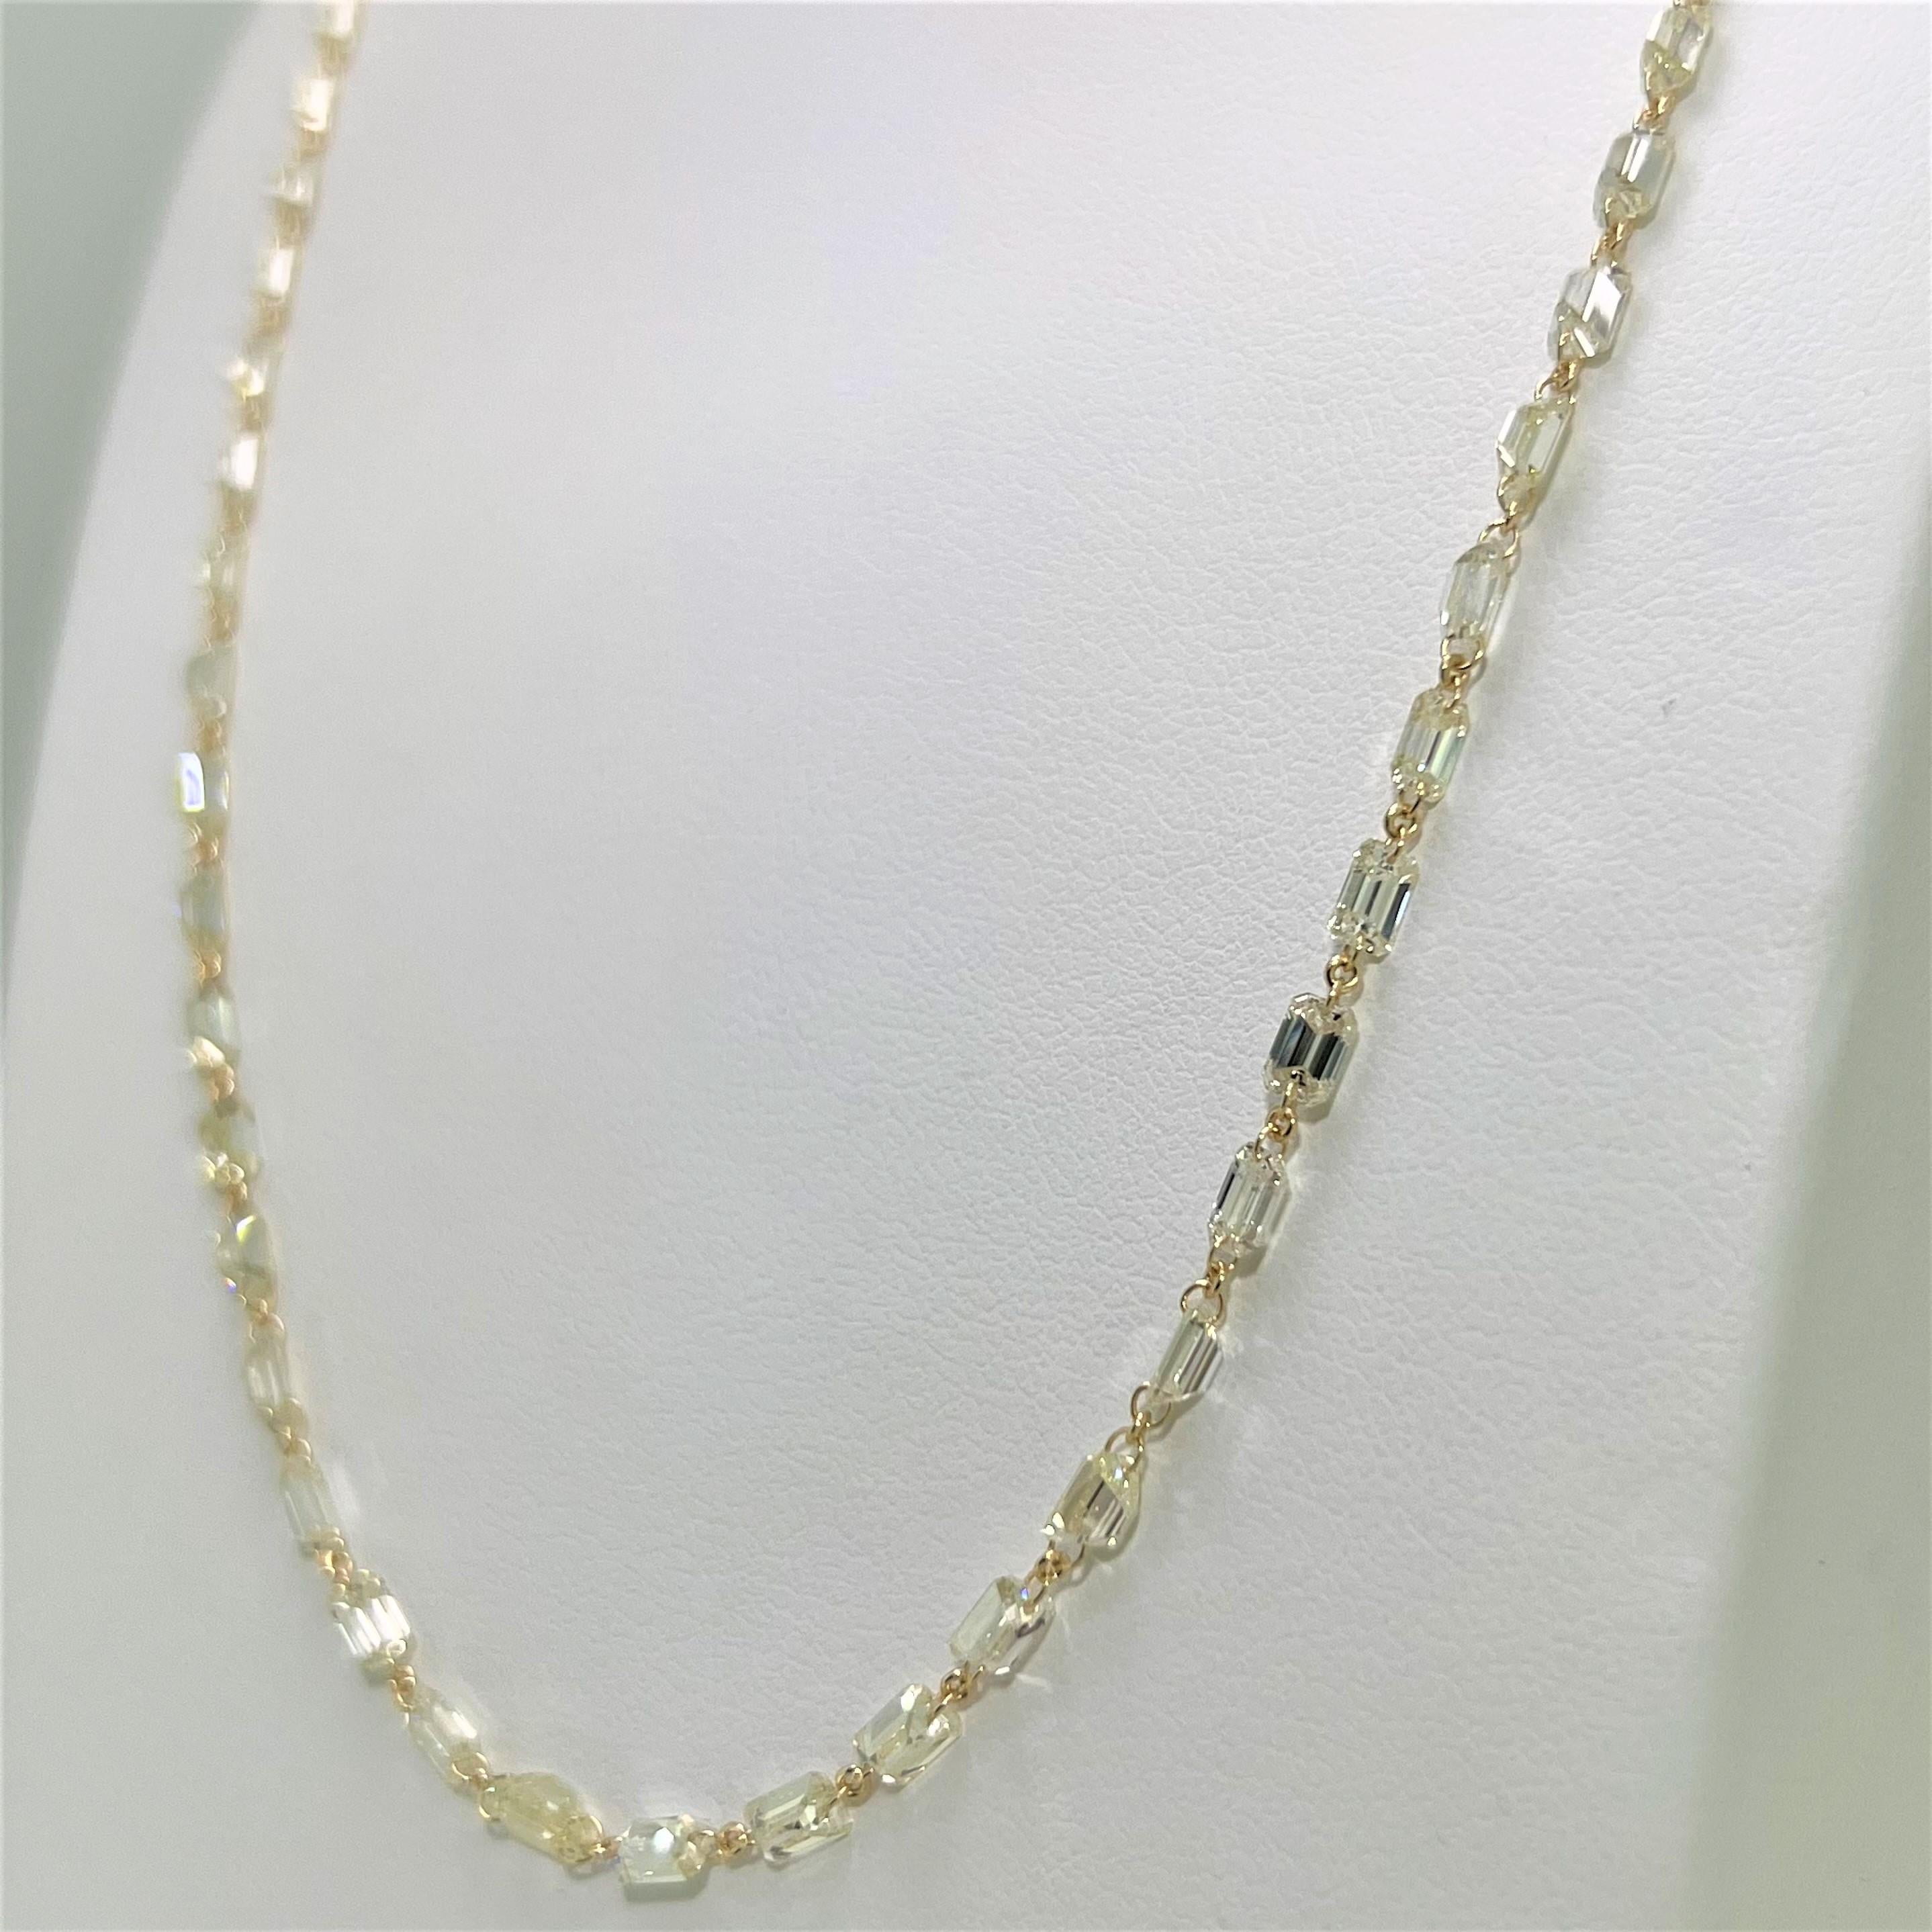 This is a timeless piece Yellow Diamond Necklace that has the ability to compliment anything you wear.  Embellished with 116 pieces of Tapas shaped Yellow Diamonds set on 18 Karat Yellow Gold, weighing 19.80 carats in total.  It displays gorgeous